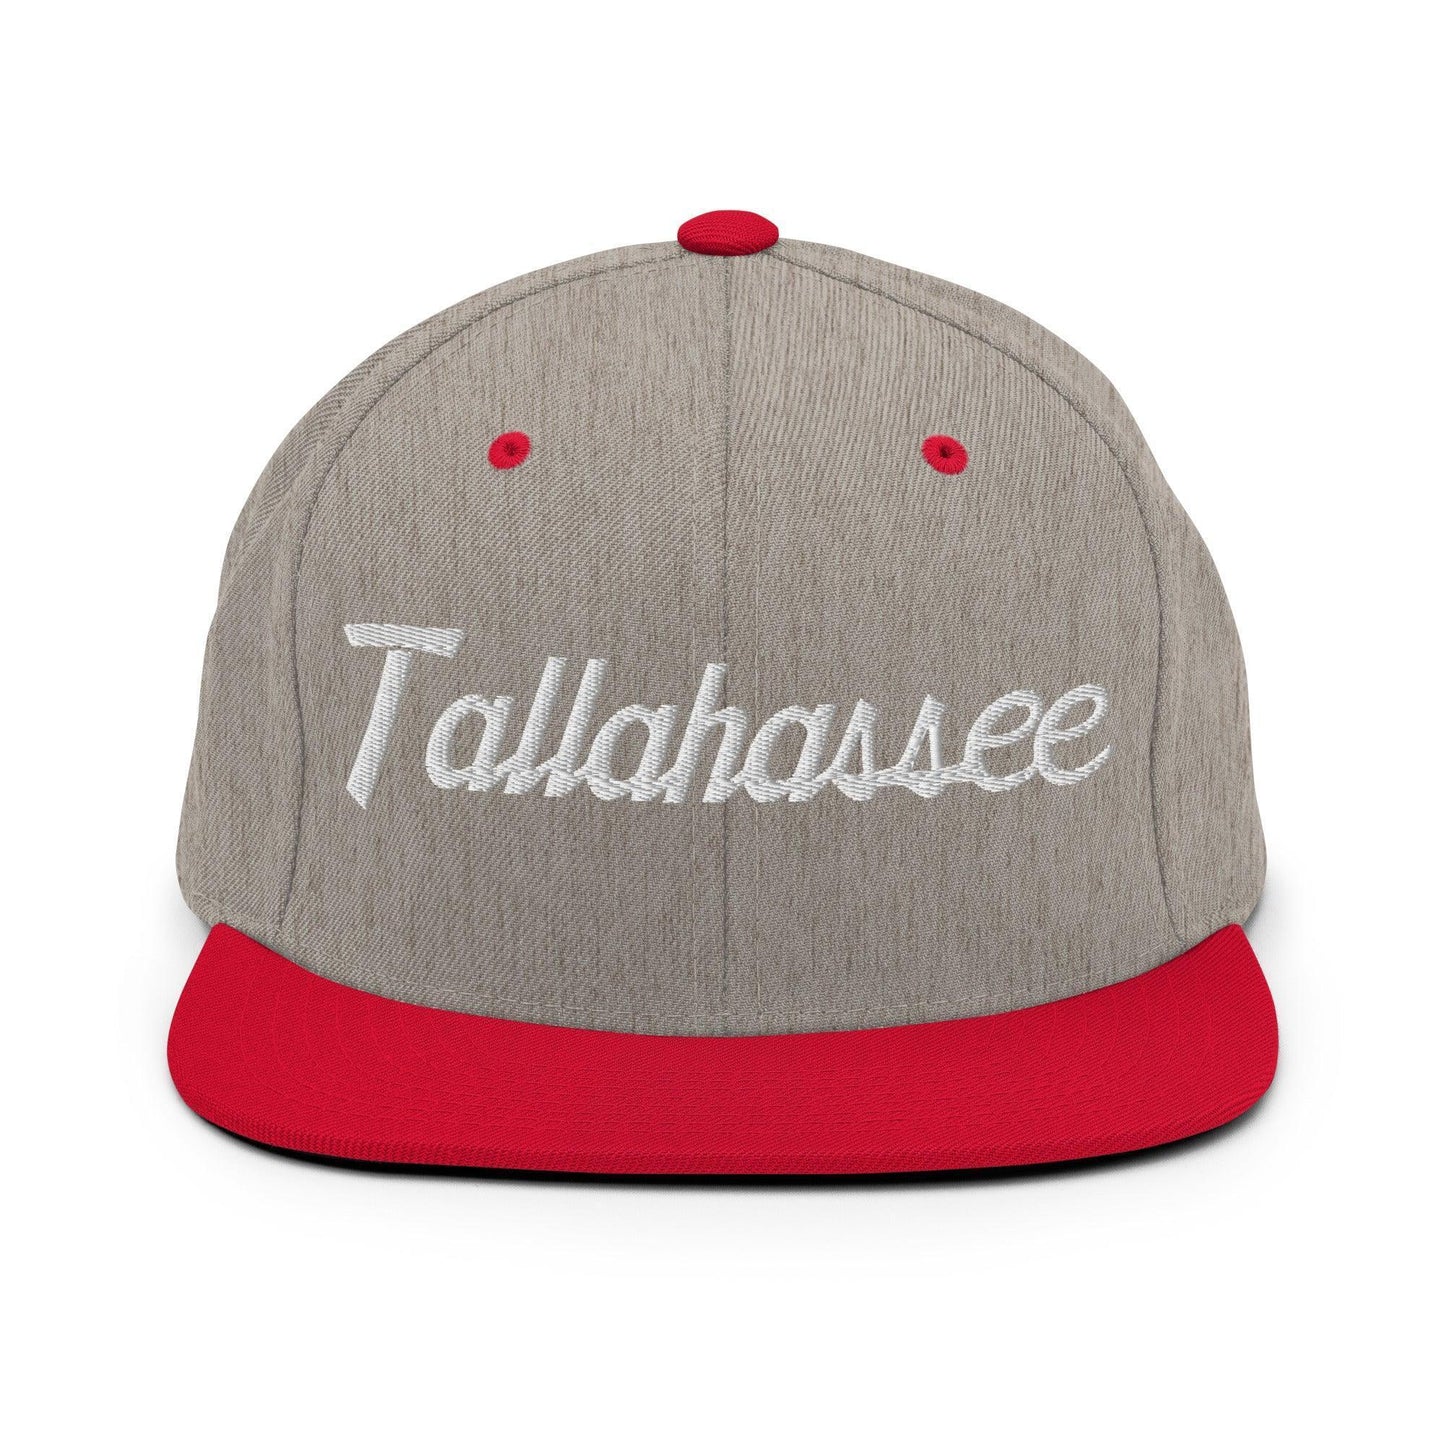 Tallahassee Script Snapback Hat Heather Grey/ Red